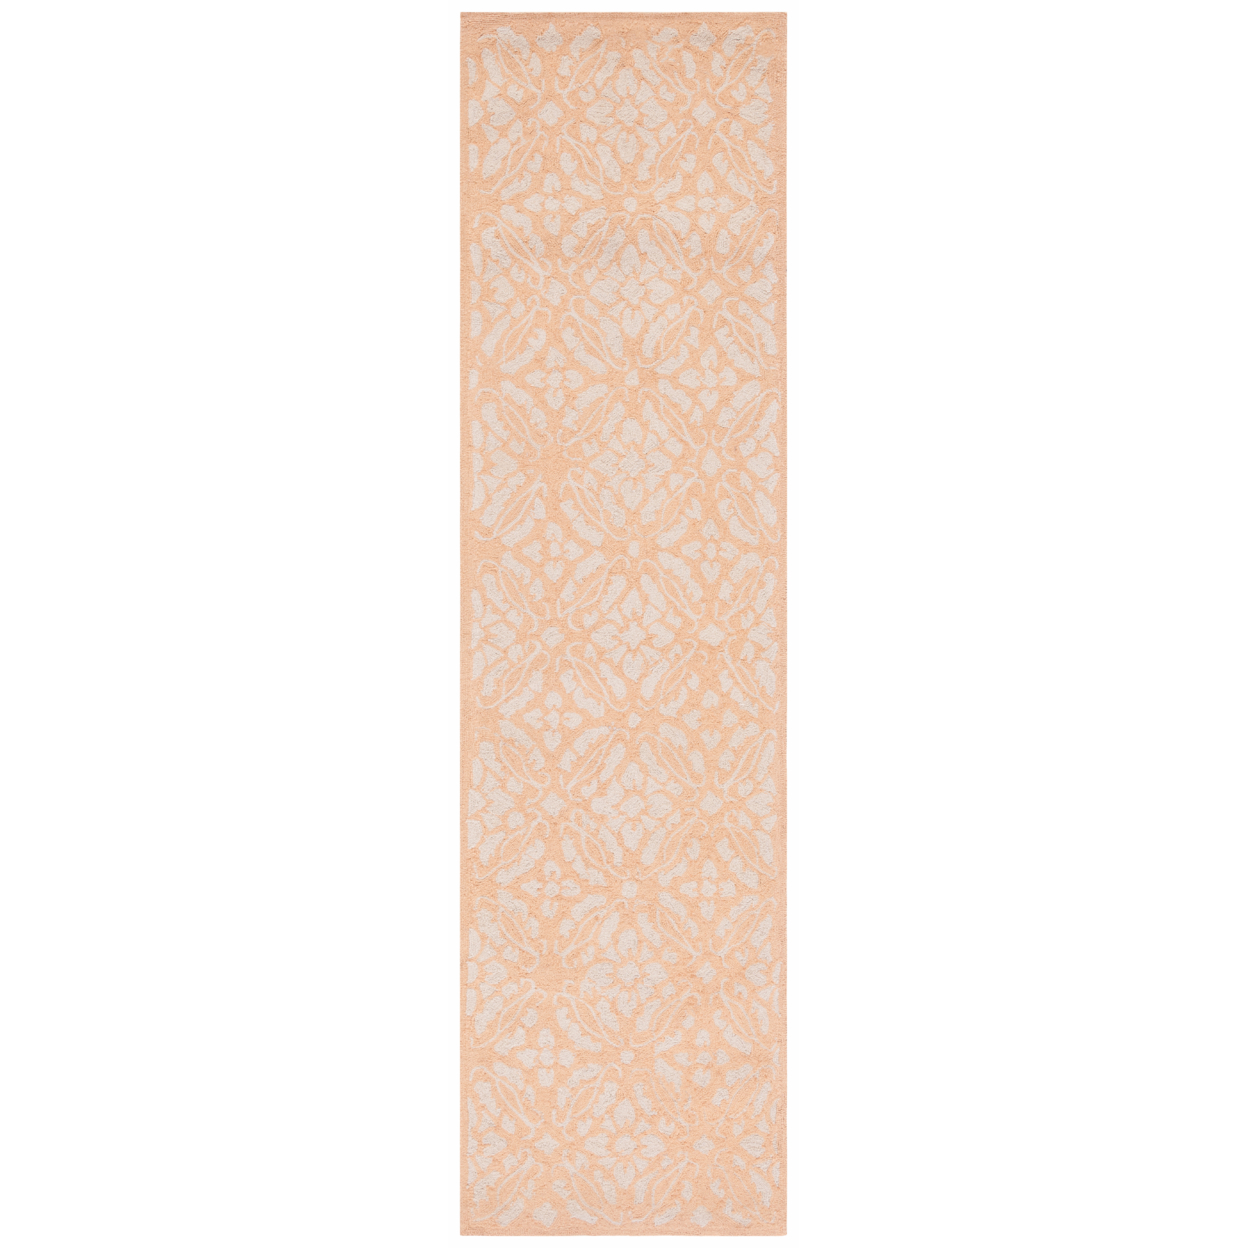 SAFAVIEH Chelsea Collection HK723C Hand-hooked Blush Rug - 2' 6 X 12'